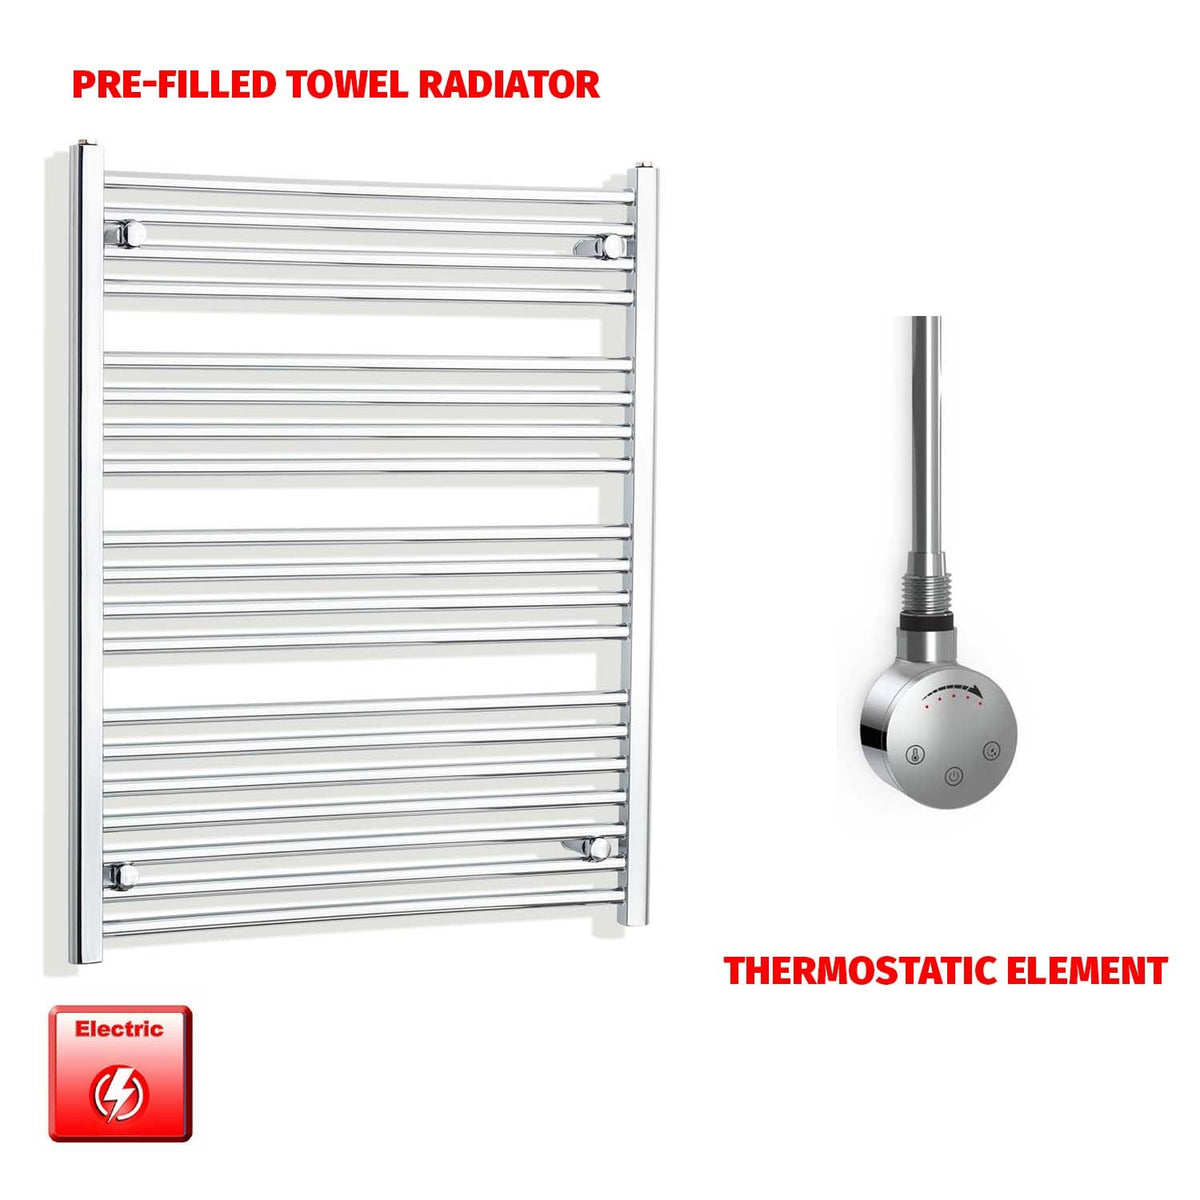 1000 x 750 Pre-Filled Electric Heated Towel Radiator Curved or Straight Chrome SMR Thermostatic element no timer